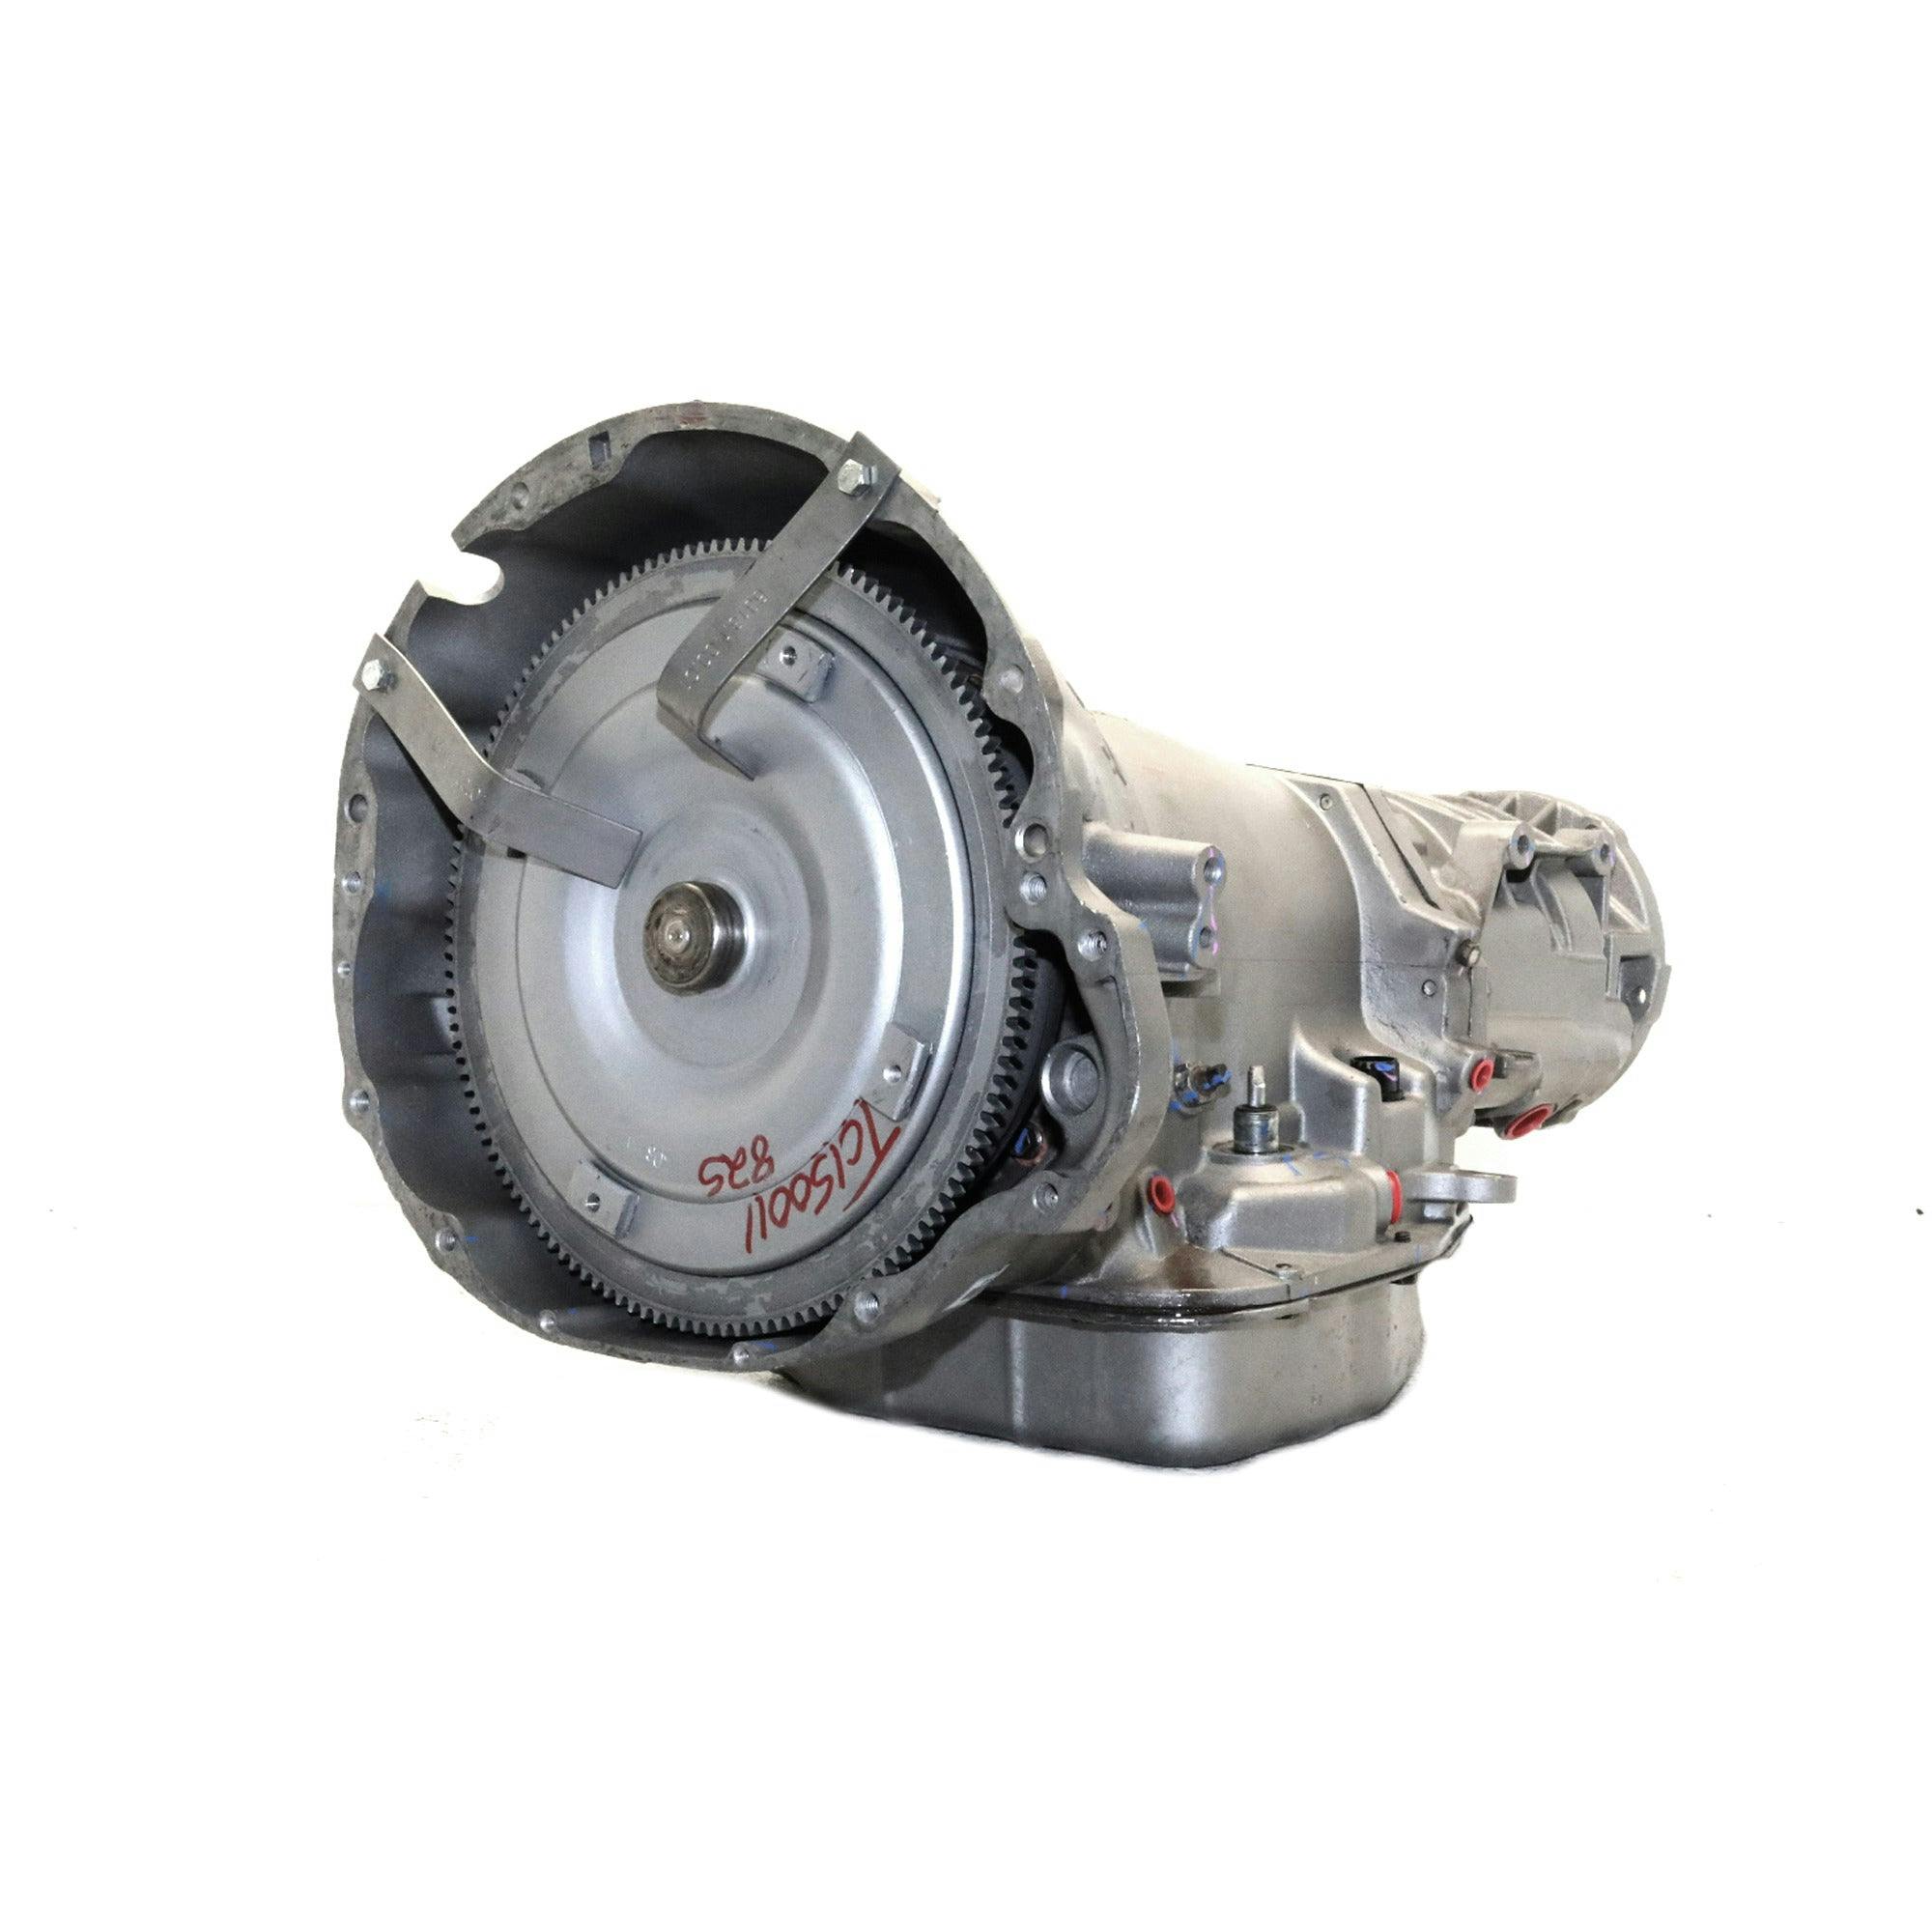 Automatic Transmission for 1996-1999 Dodge Ram 1500/2500/3500 4WD with 5.2/5.9L V8 Engine